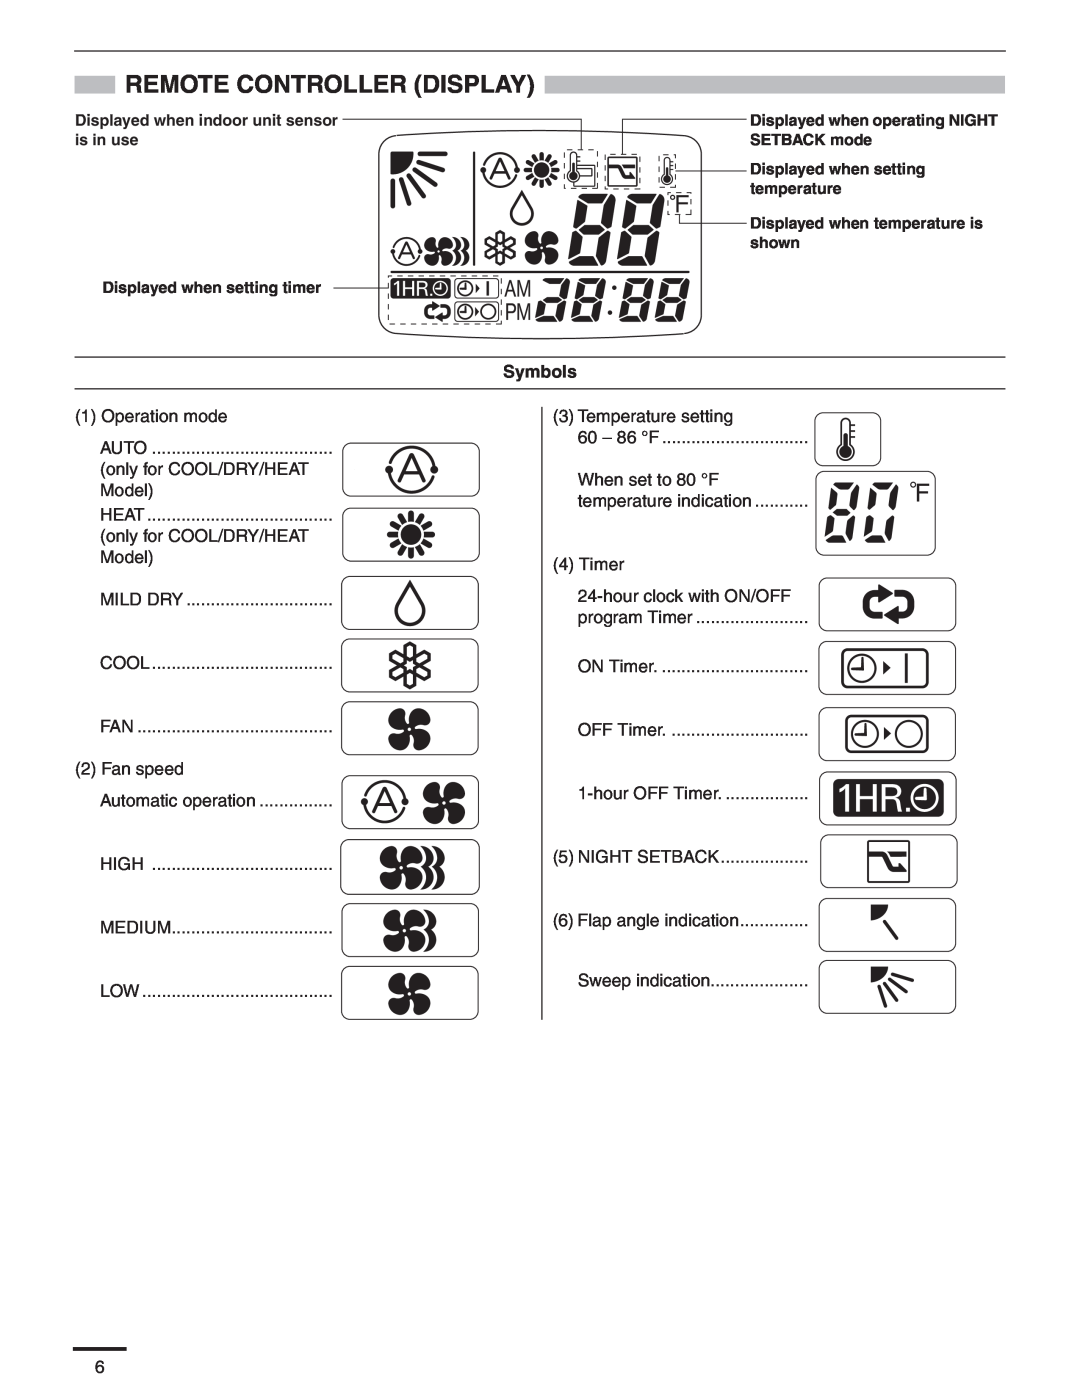 Panasonic R410A service manual Remote Controller Display, Symbols, 1Operation mode AUTO only for COOL/DRY/HEAT Model 